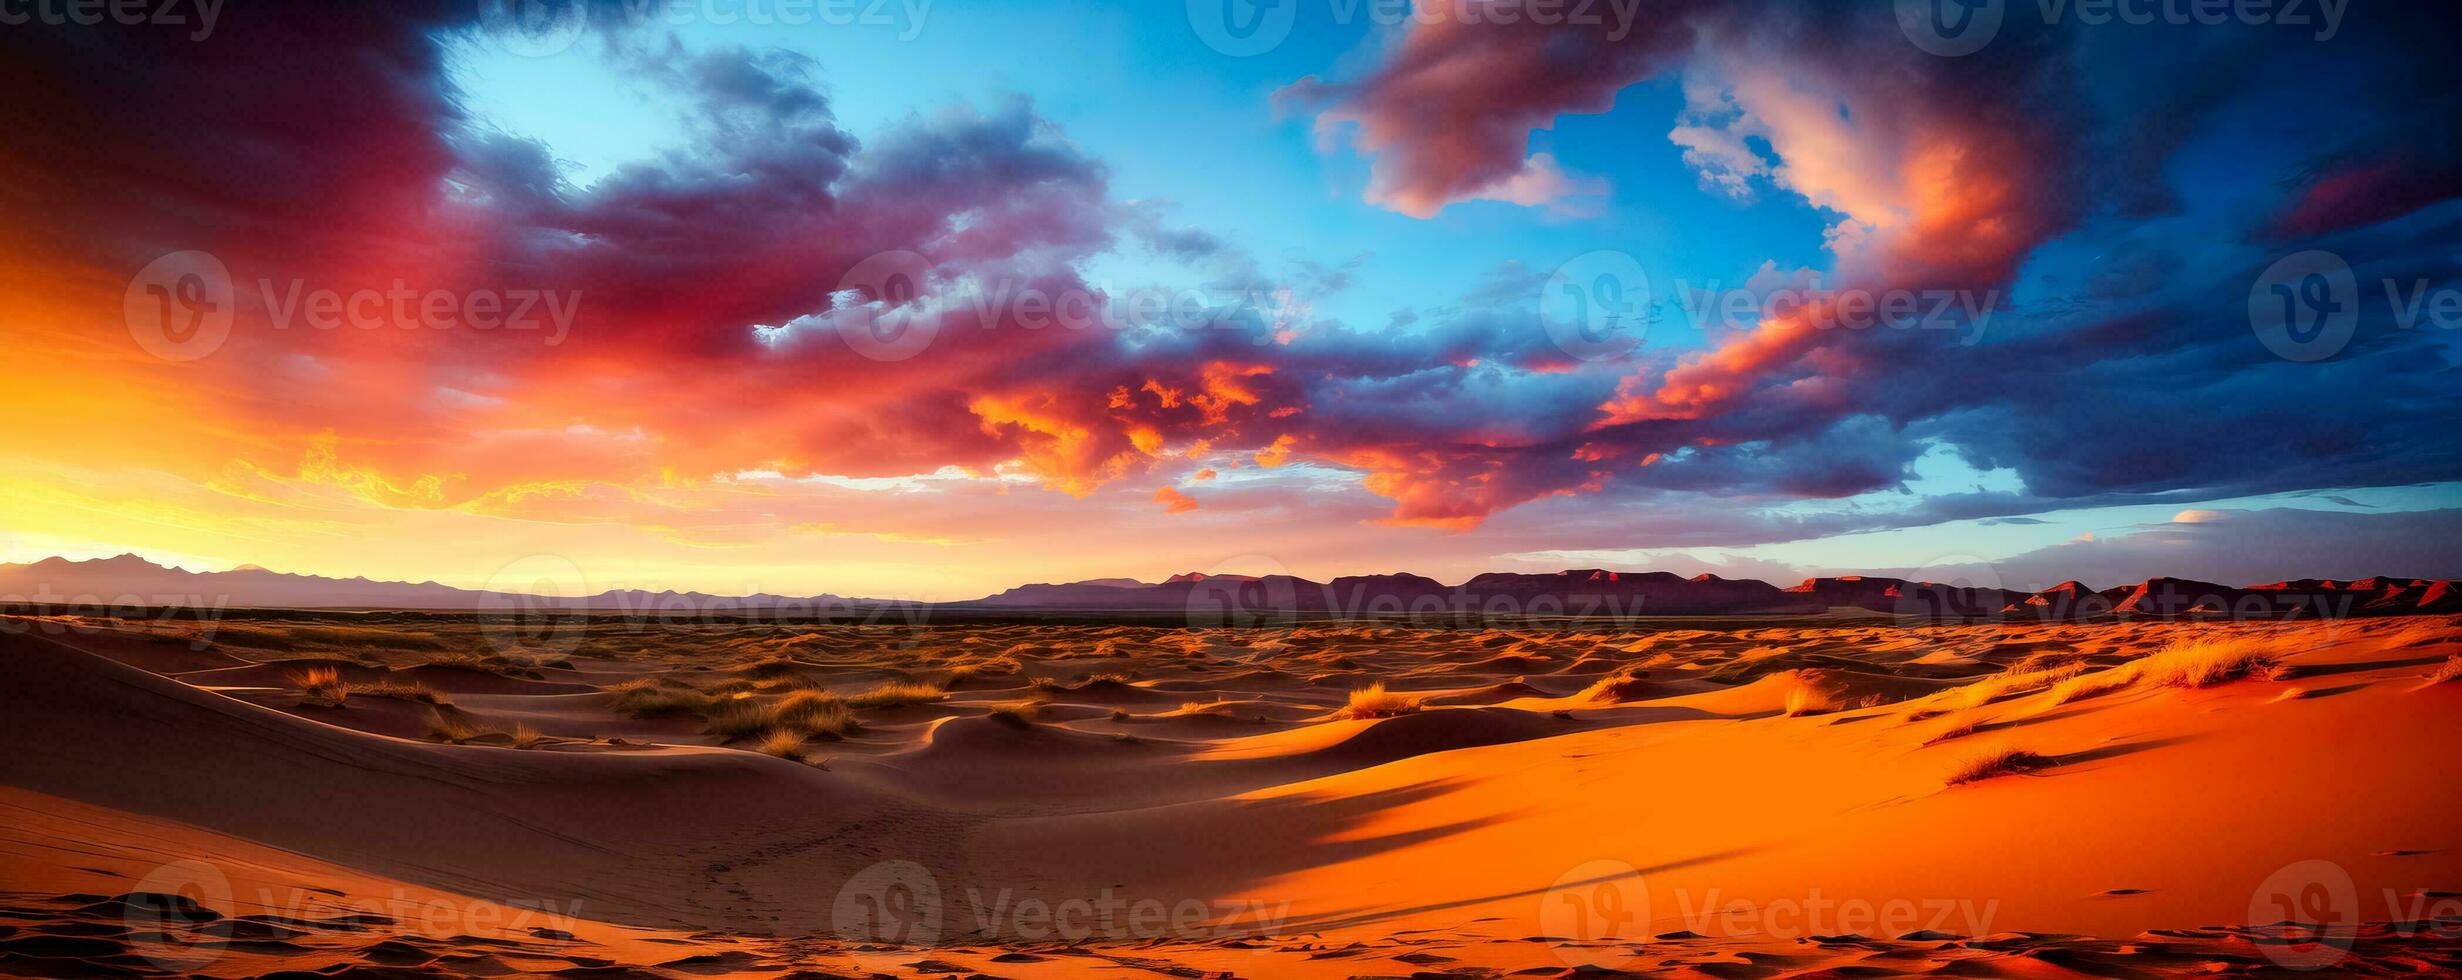 Vibrant rainbow arcs gracefully over golden sand dunes creating a surreal and mesmerizing contrast in the desert landscape photo